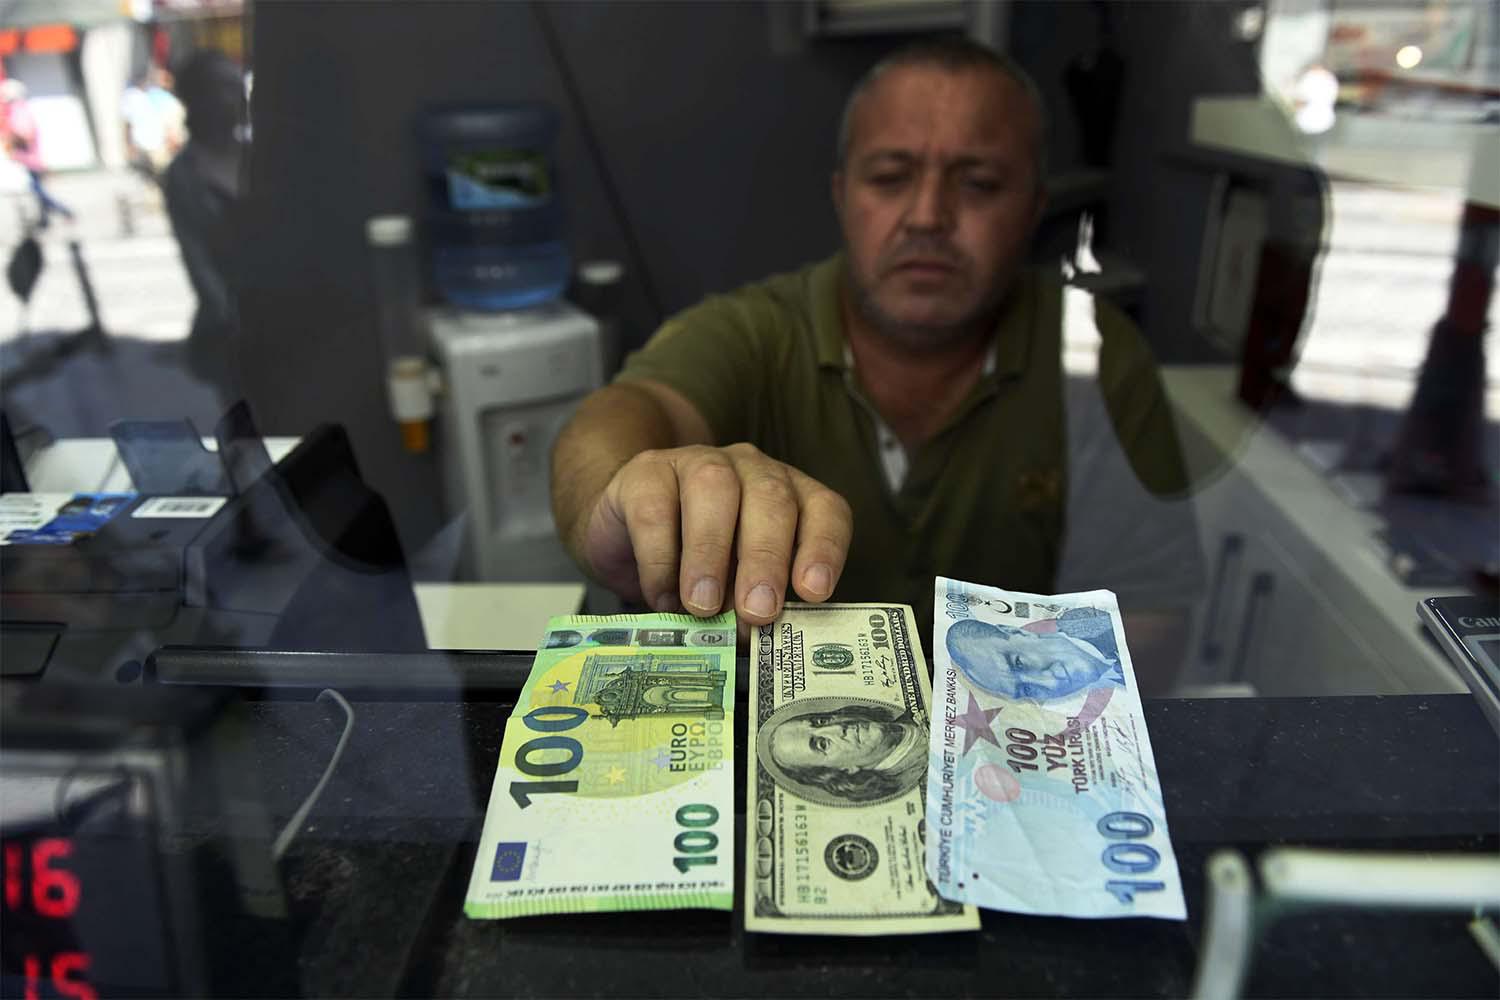 Since January 1, the Turkish currency has lost nearly 20 percent of its value against the dollar